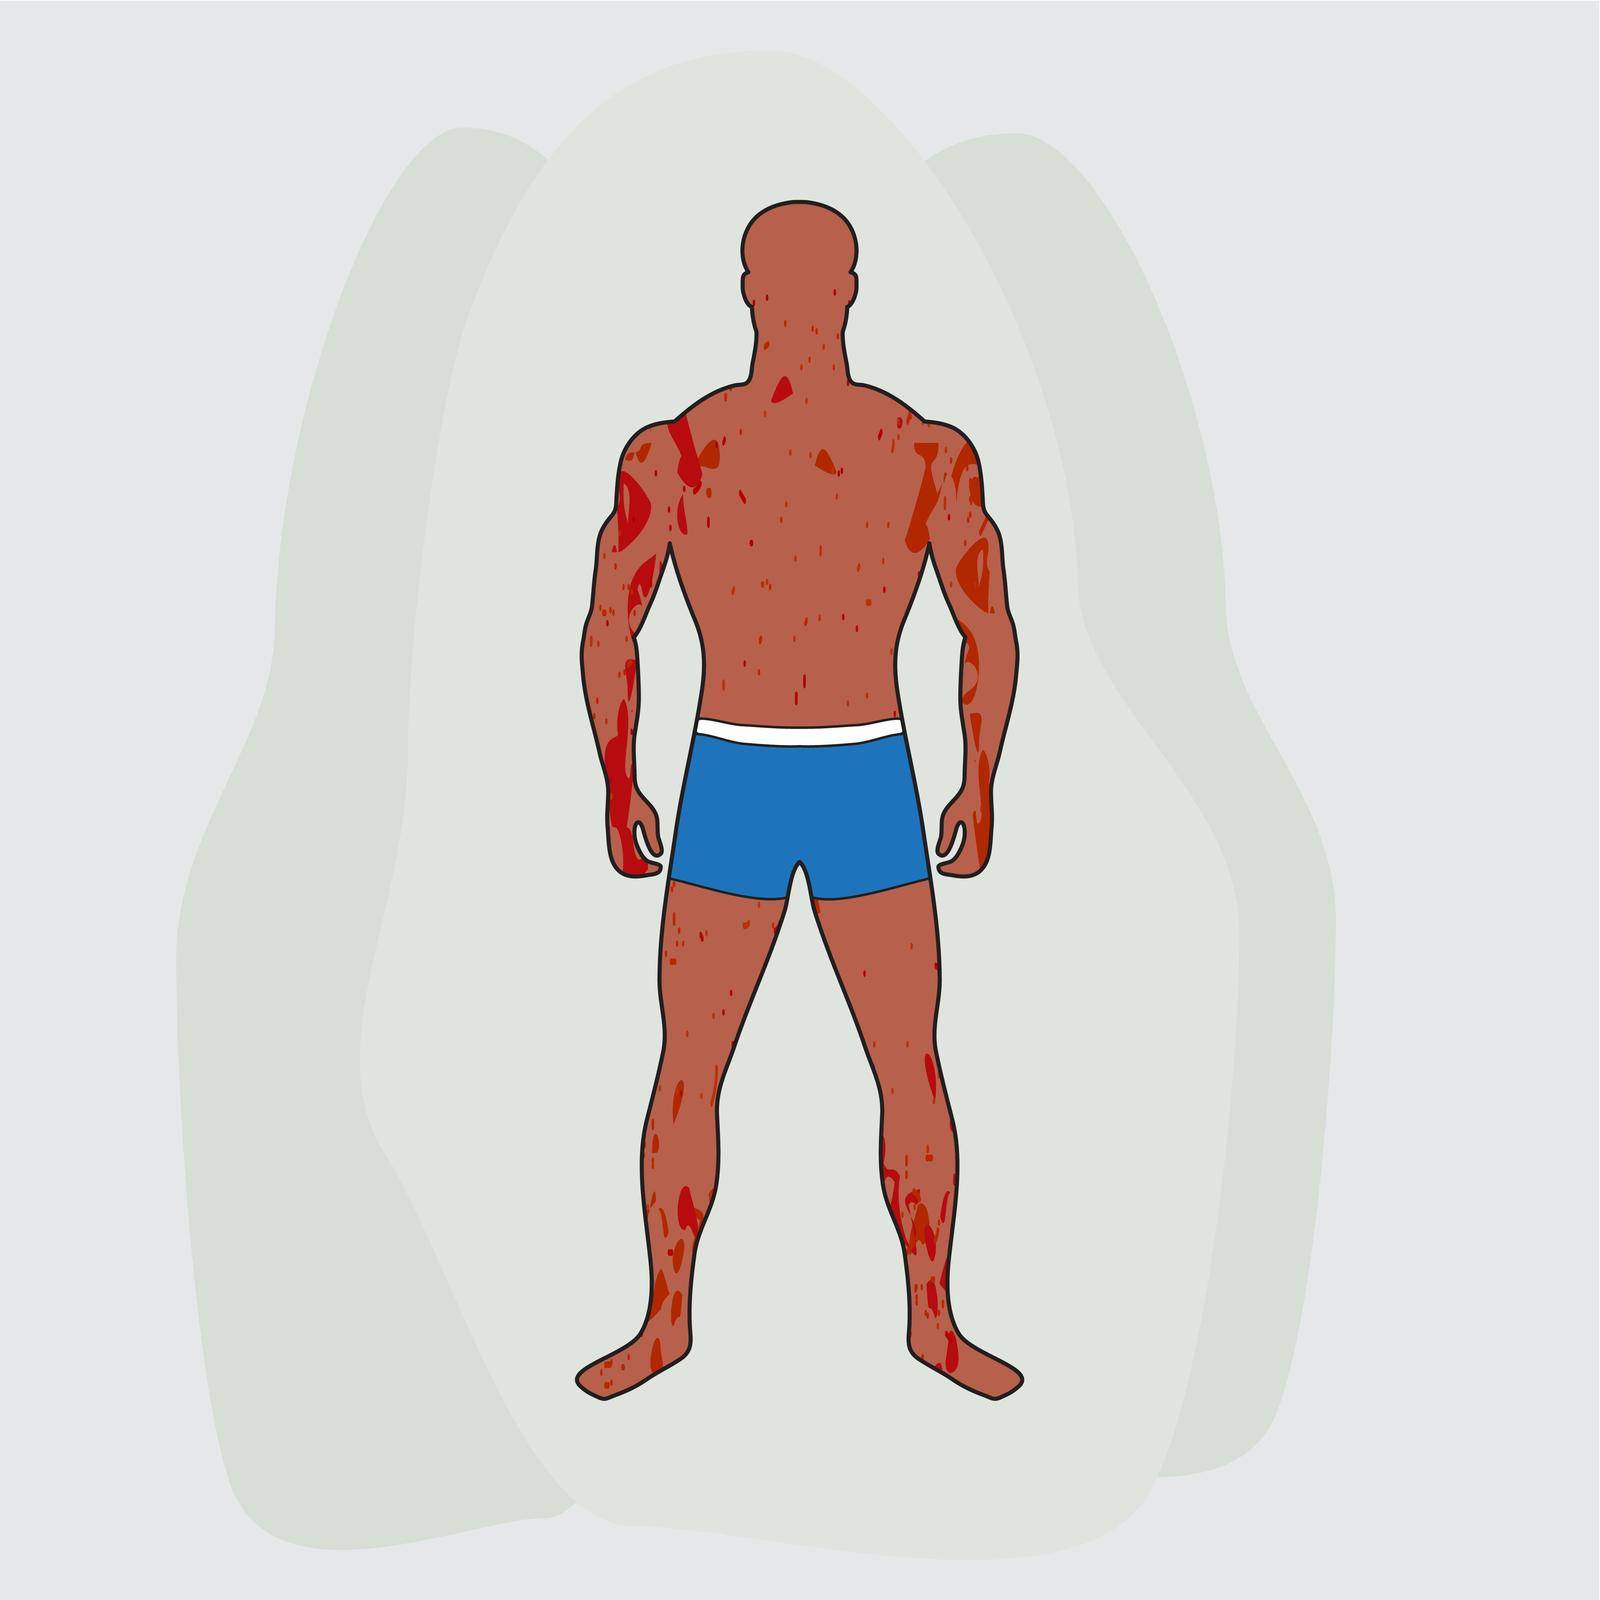 Tanned slender man in blue swimming trunks. Male figure in full growth. Red rash and spots cover whole body. Dermatological disease signs and symptoms. Painful condition of skin. For medical site, app